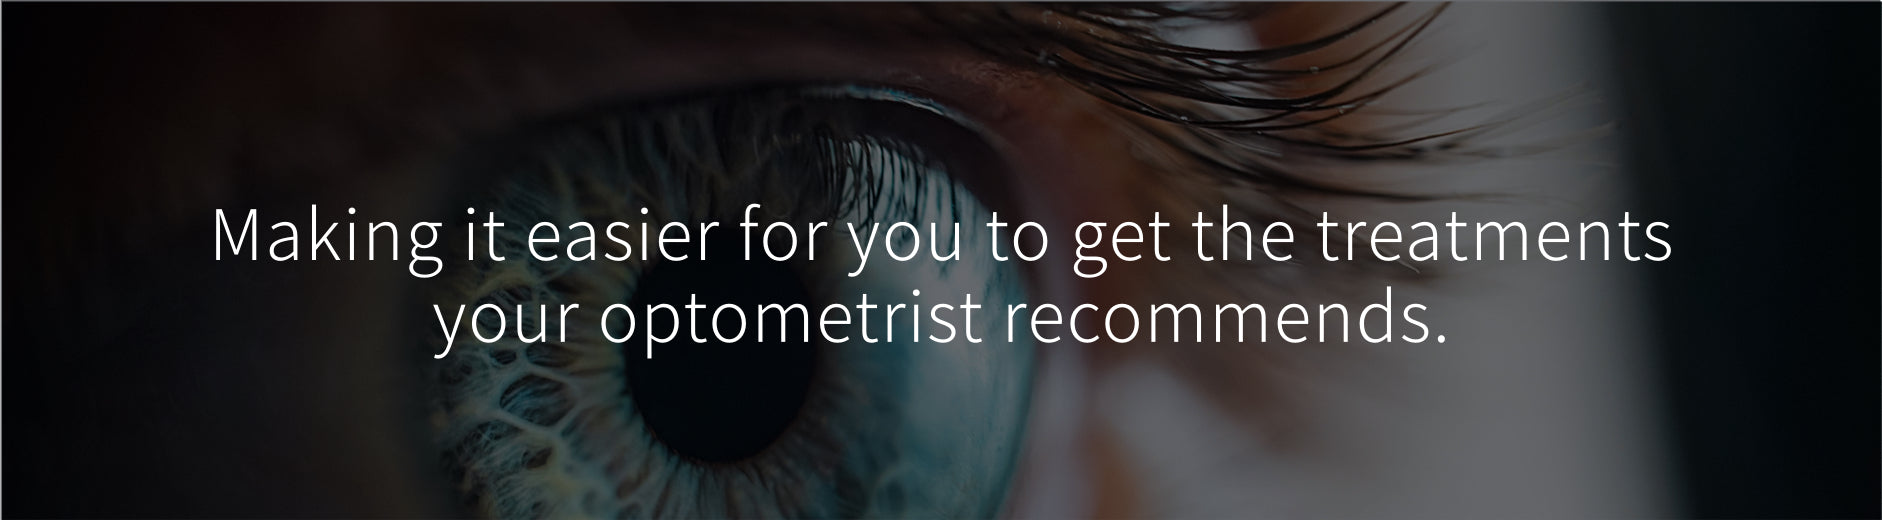 Making it easier for you to get the treatments your optometrist recommends